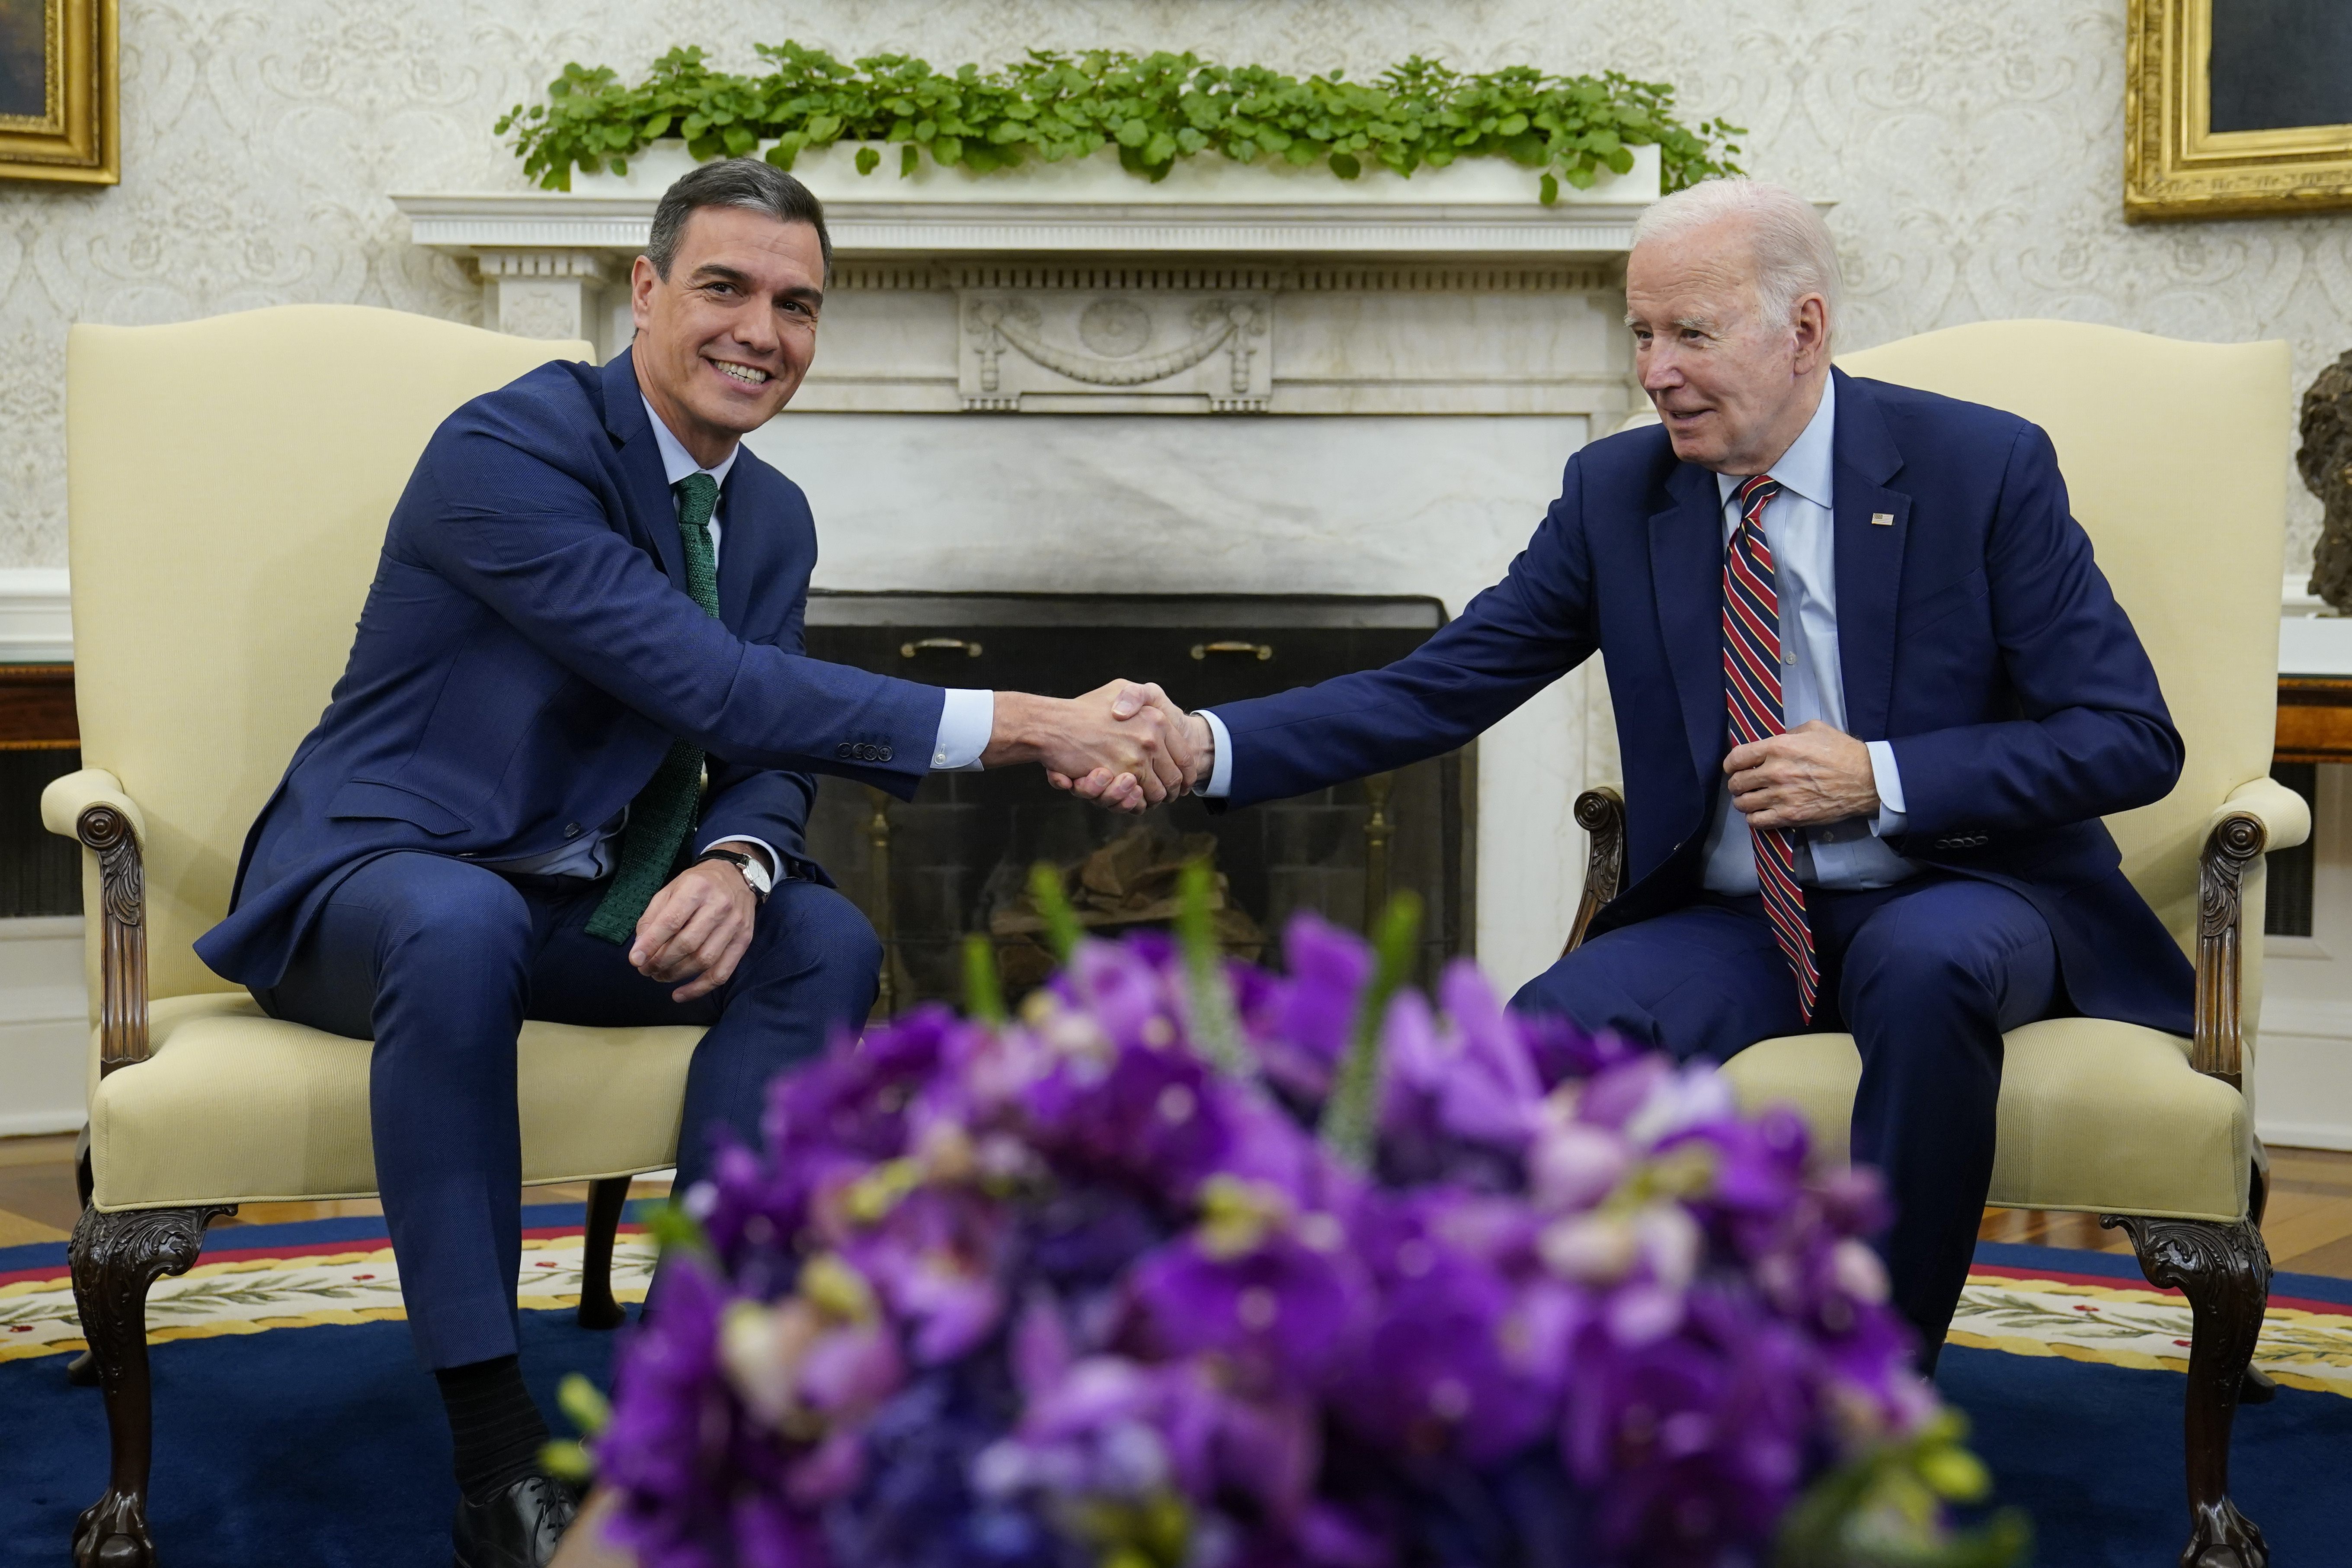 President Joe Biden shakes hands with Spain's Prime Minister Pedro Sanchez as they meet in the Oval Office of the White House in Washington, Friday, May 12, 2023. (AP Photo/Susan Walsh)